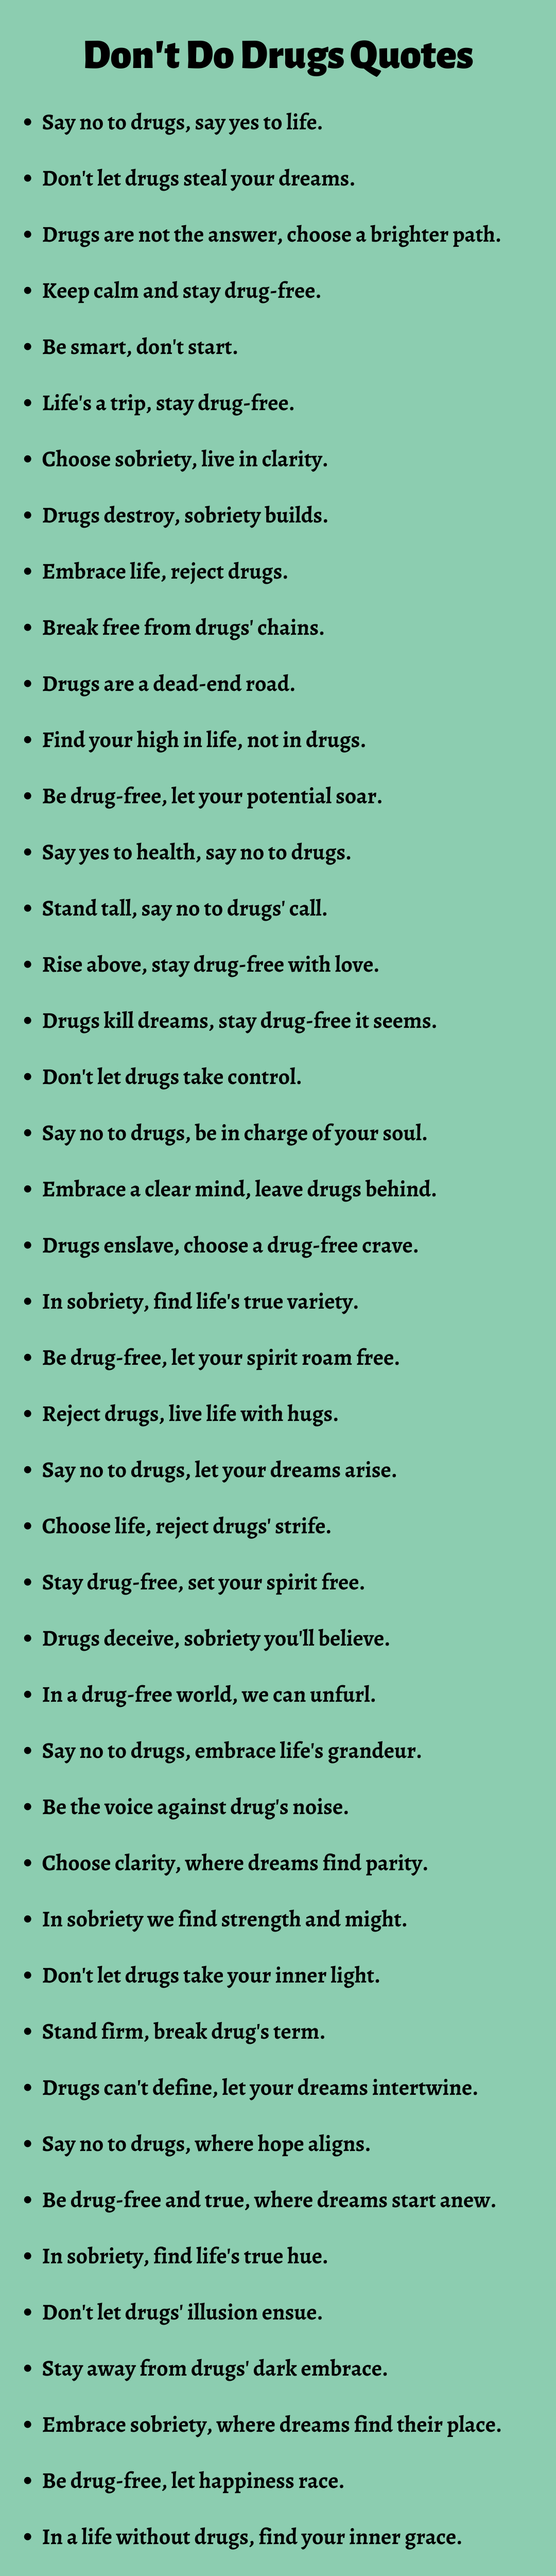 Don't Do Drugs Quotes